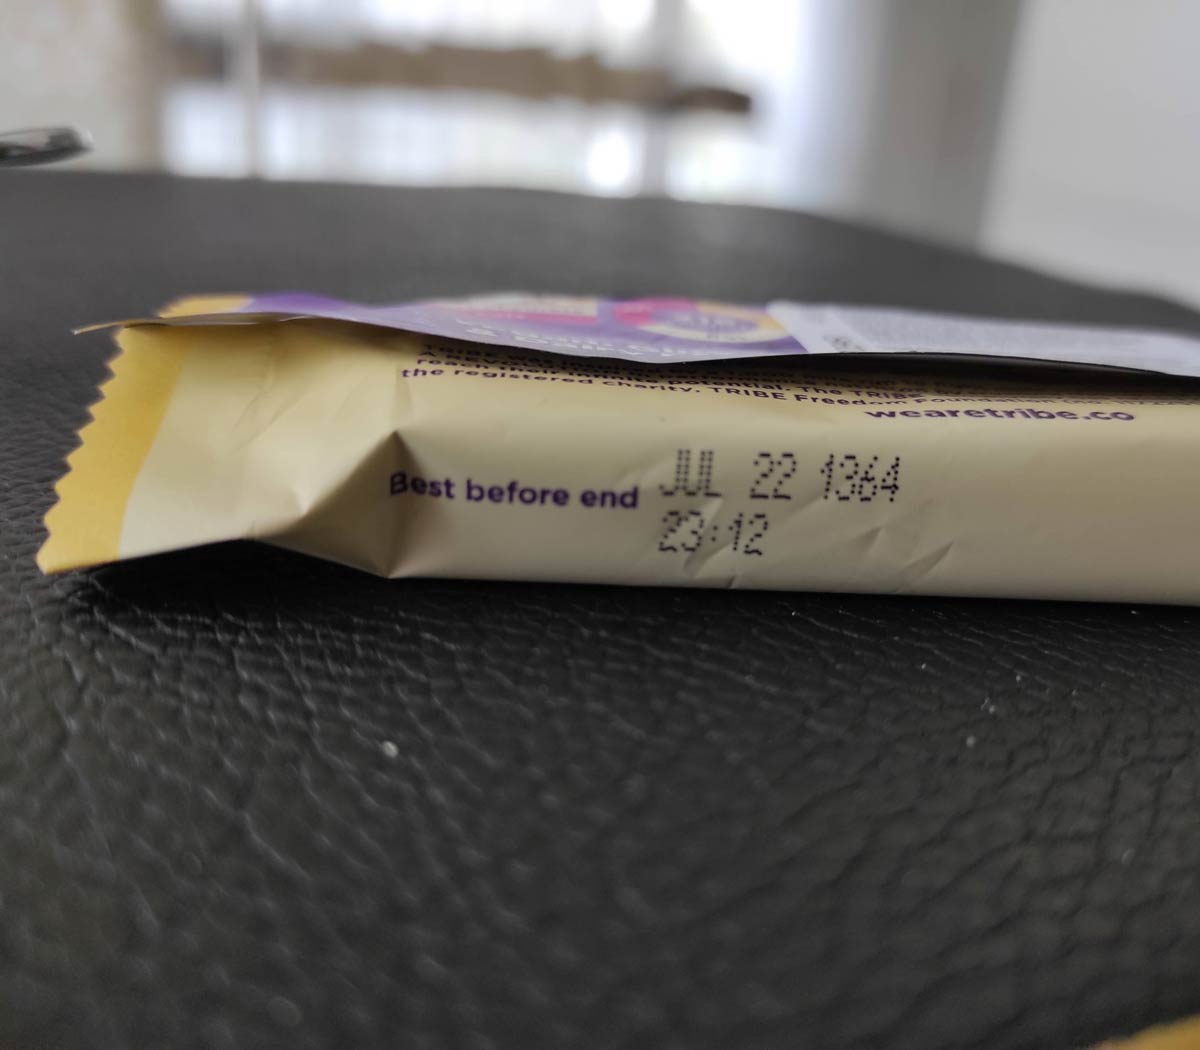 My protein bar expired in medieval times